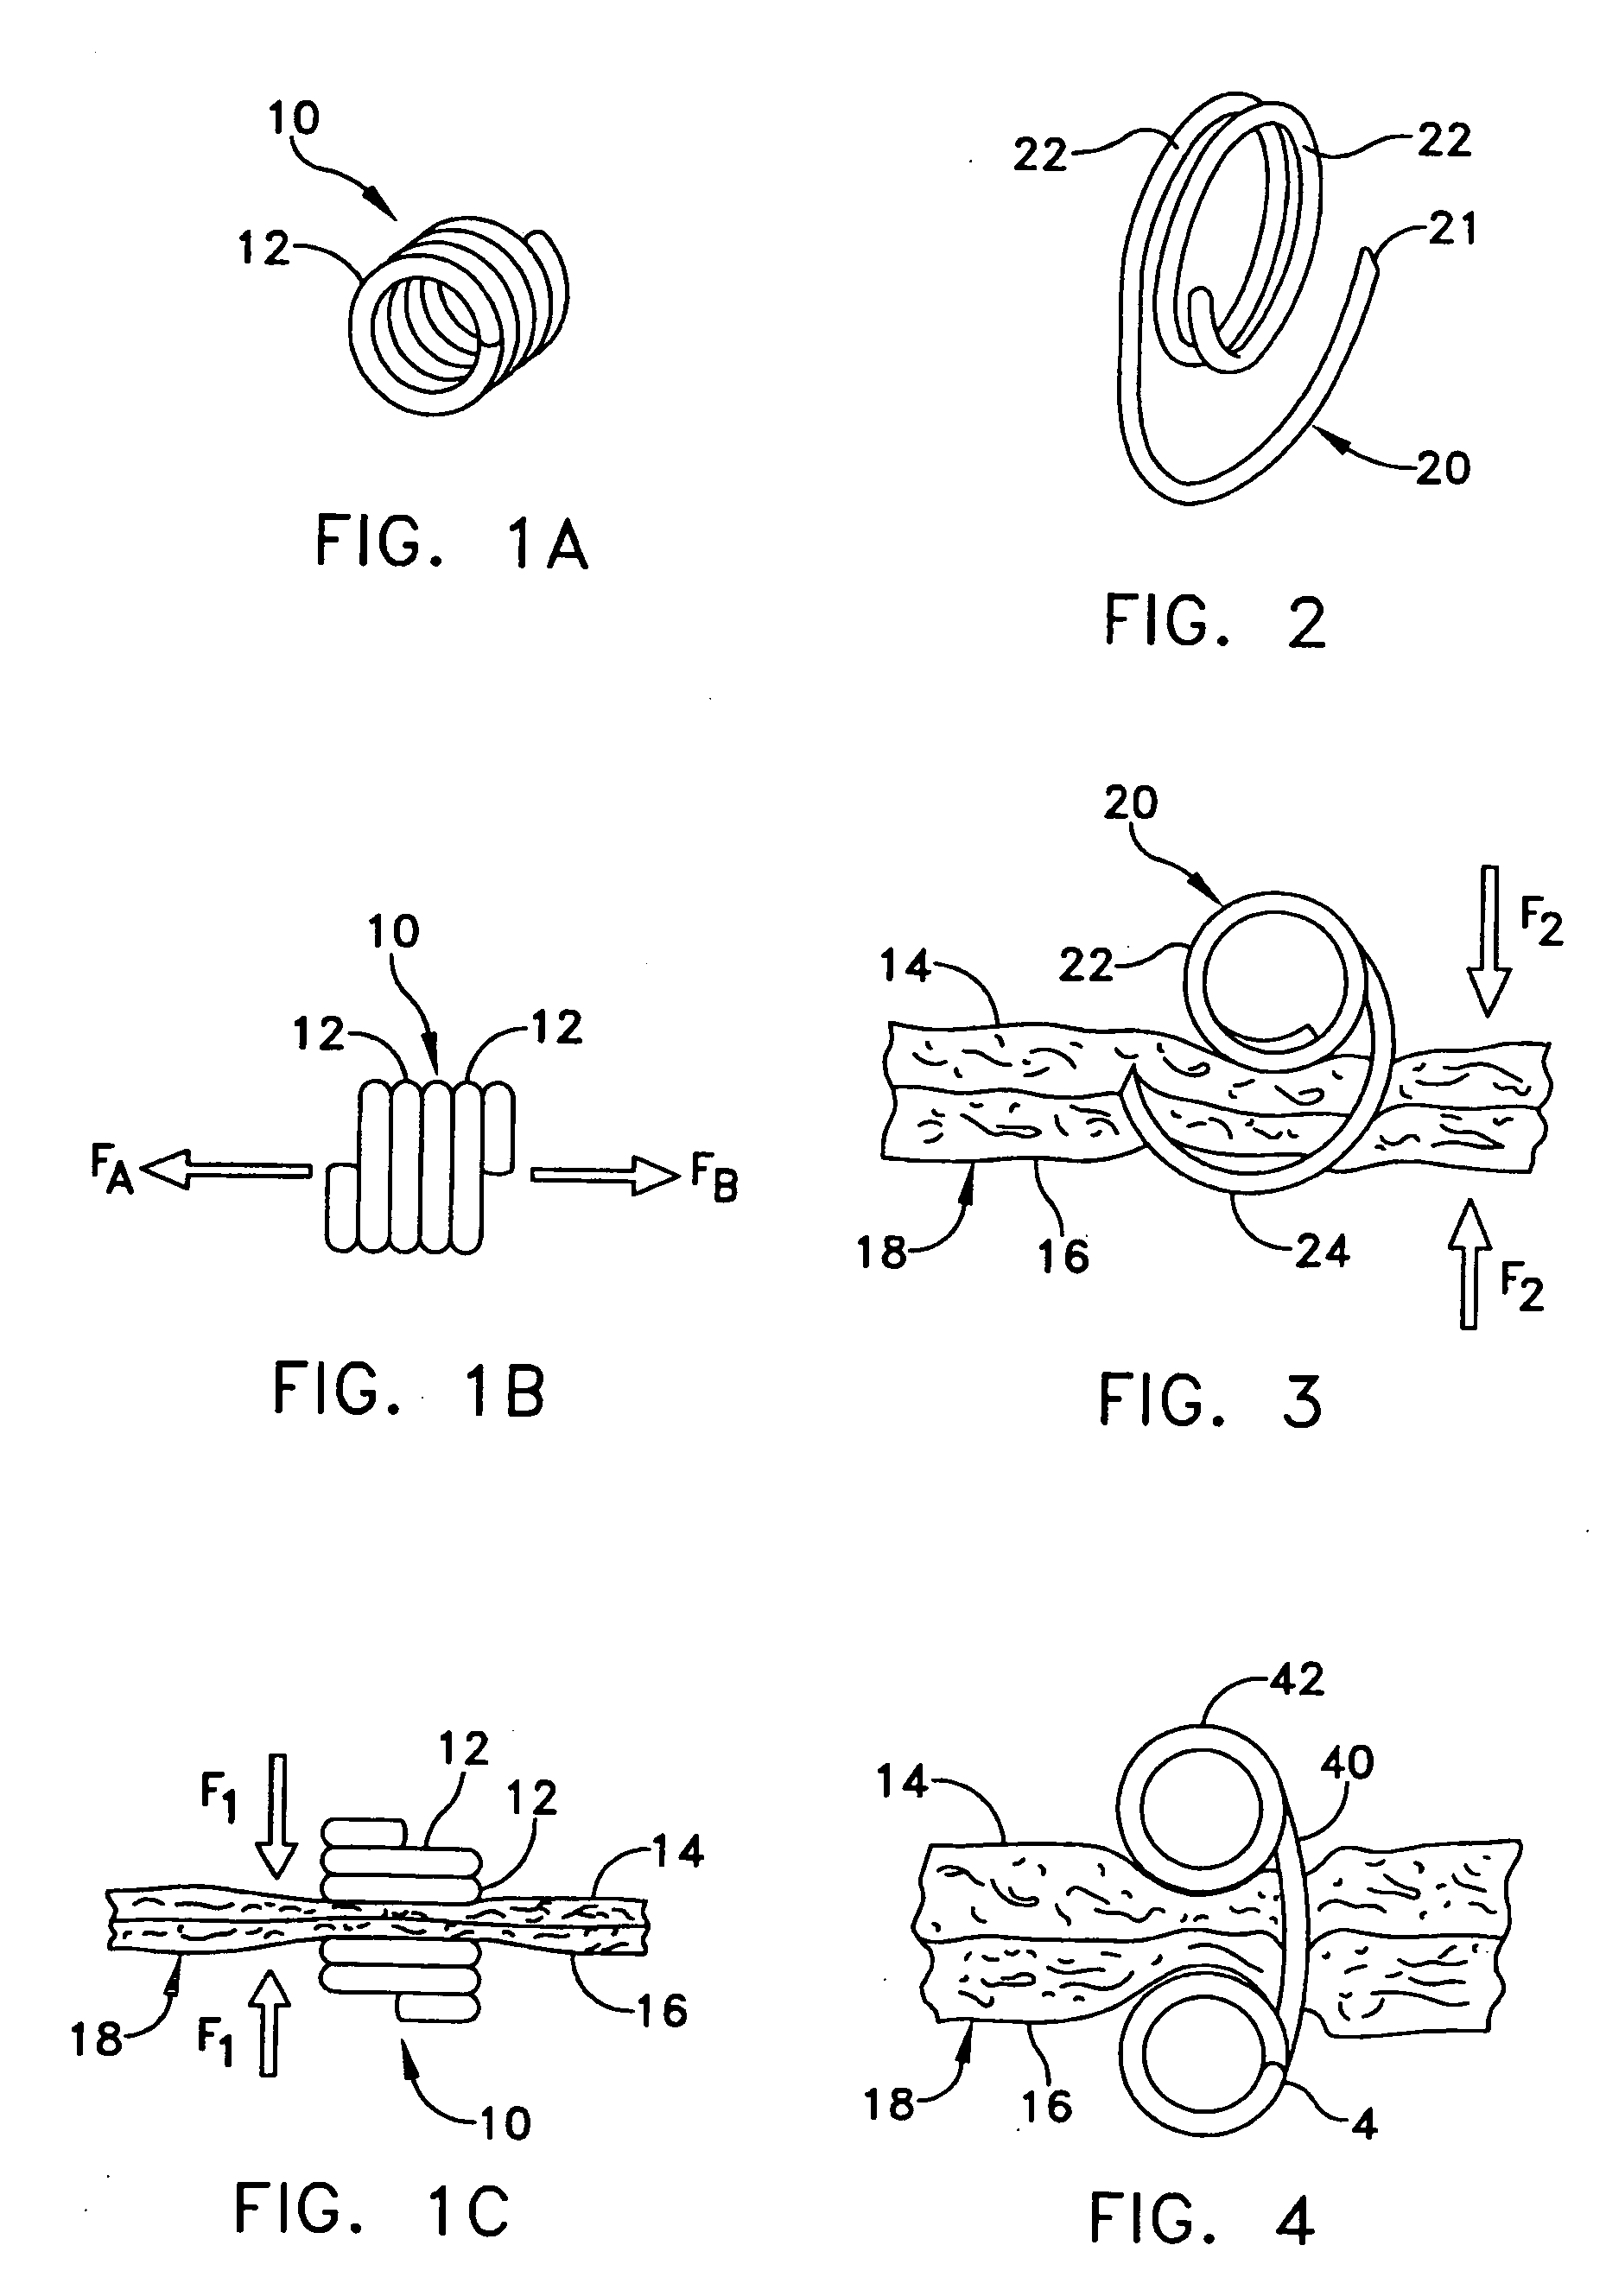 Vascular bypass grafting instrument and method